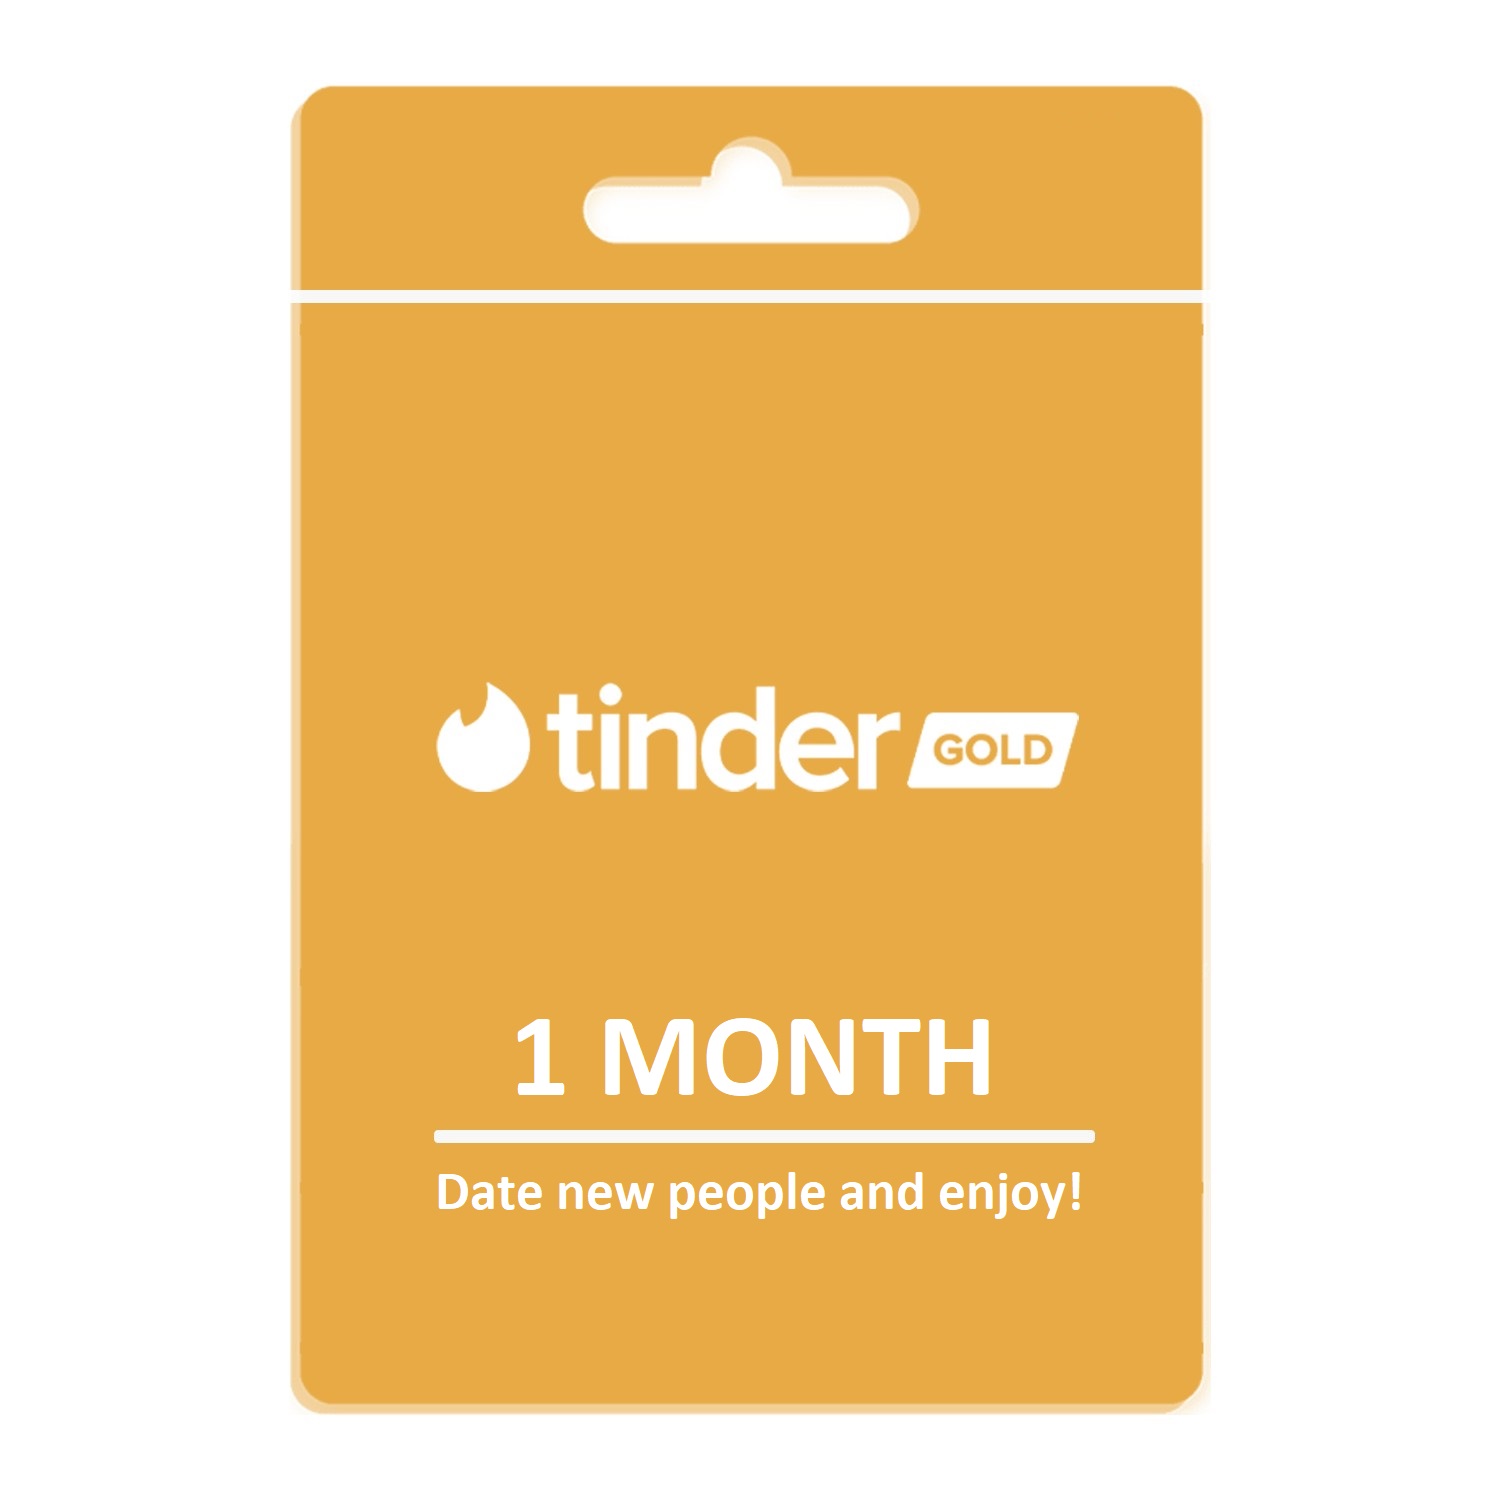 Buy 💛Tinder GOLD Promo Code 1 Month⭐ and download